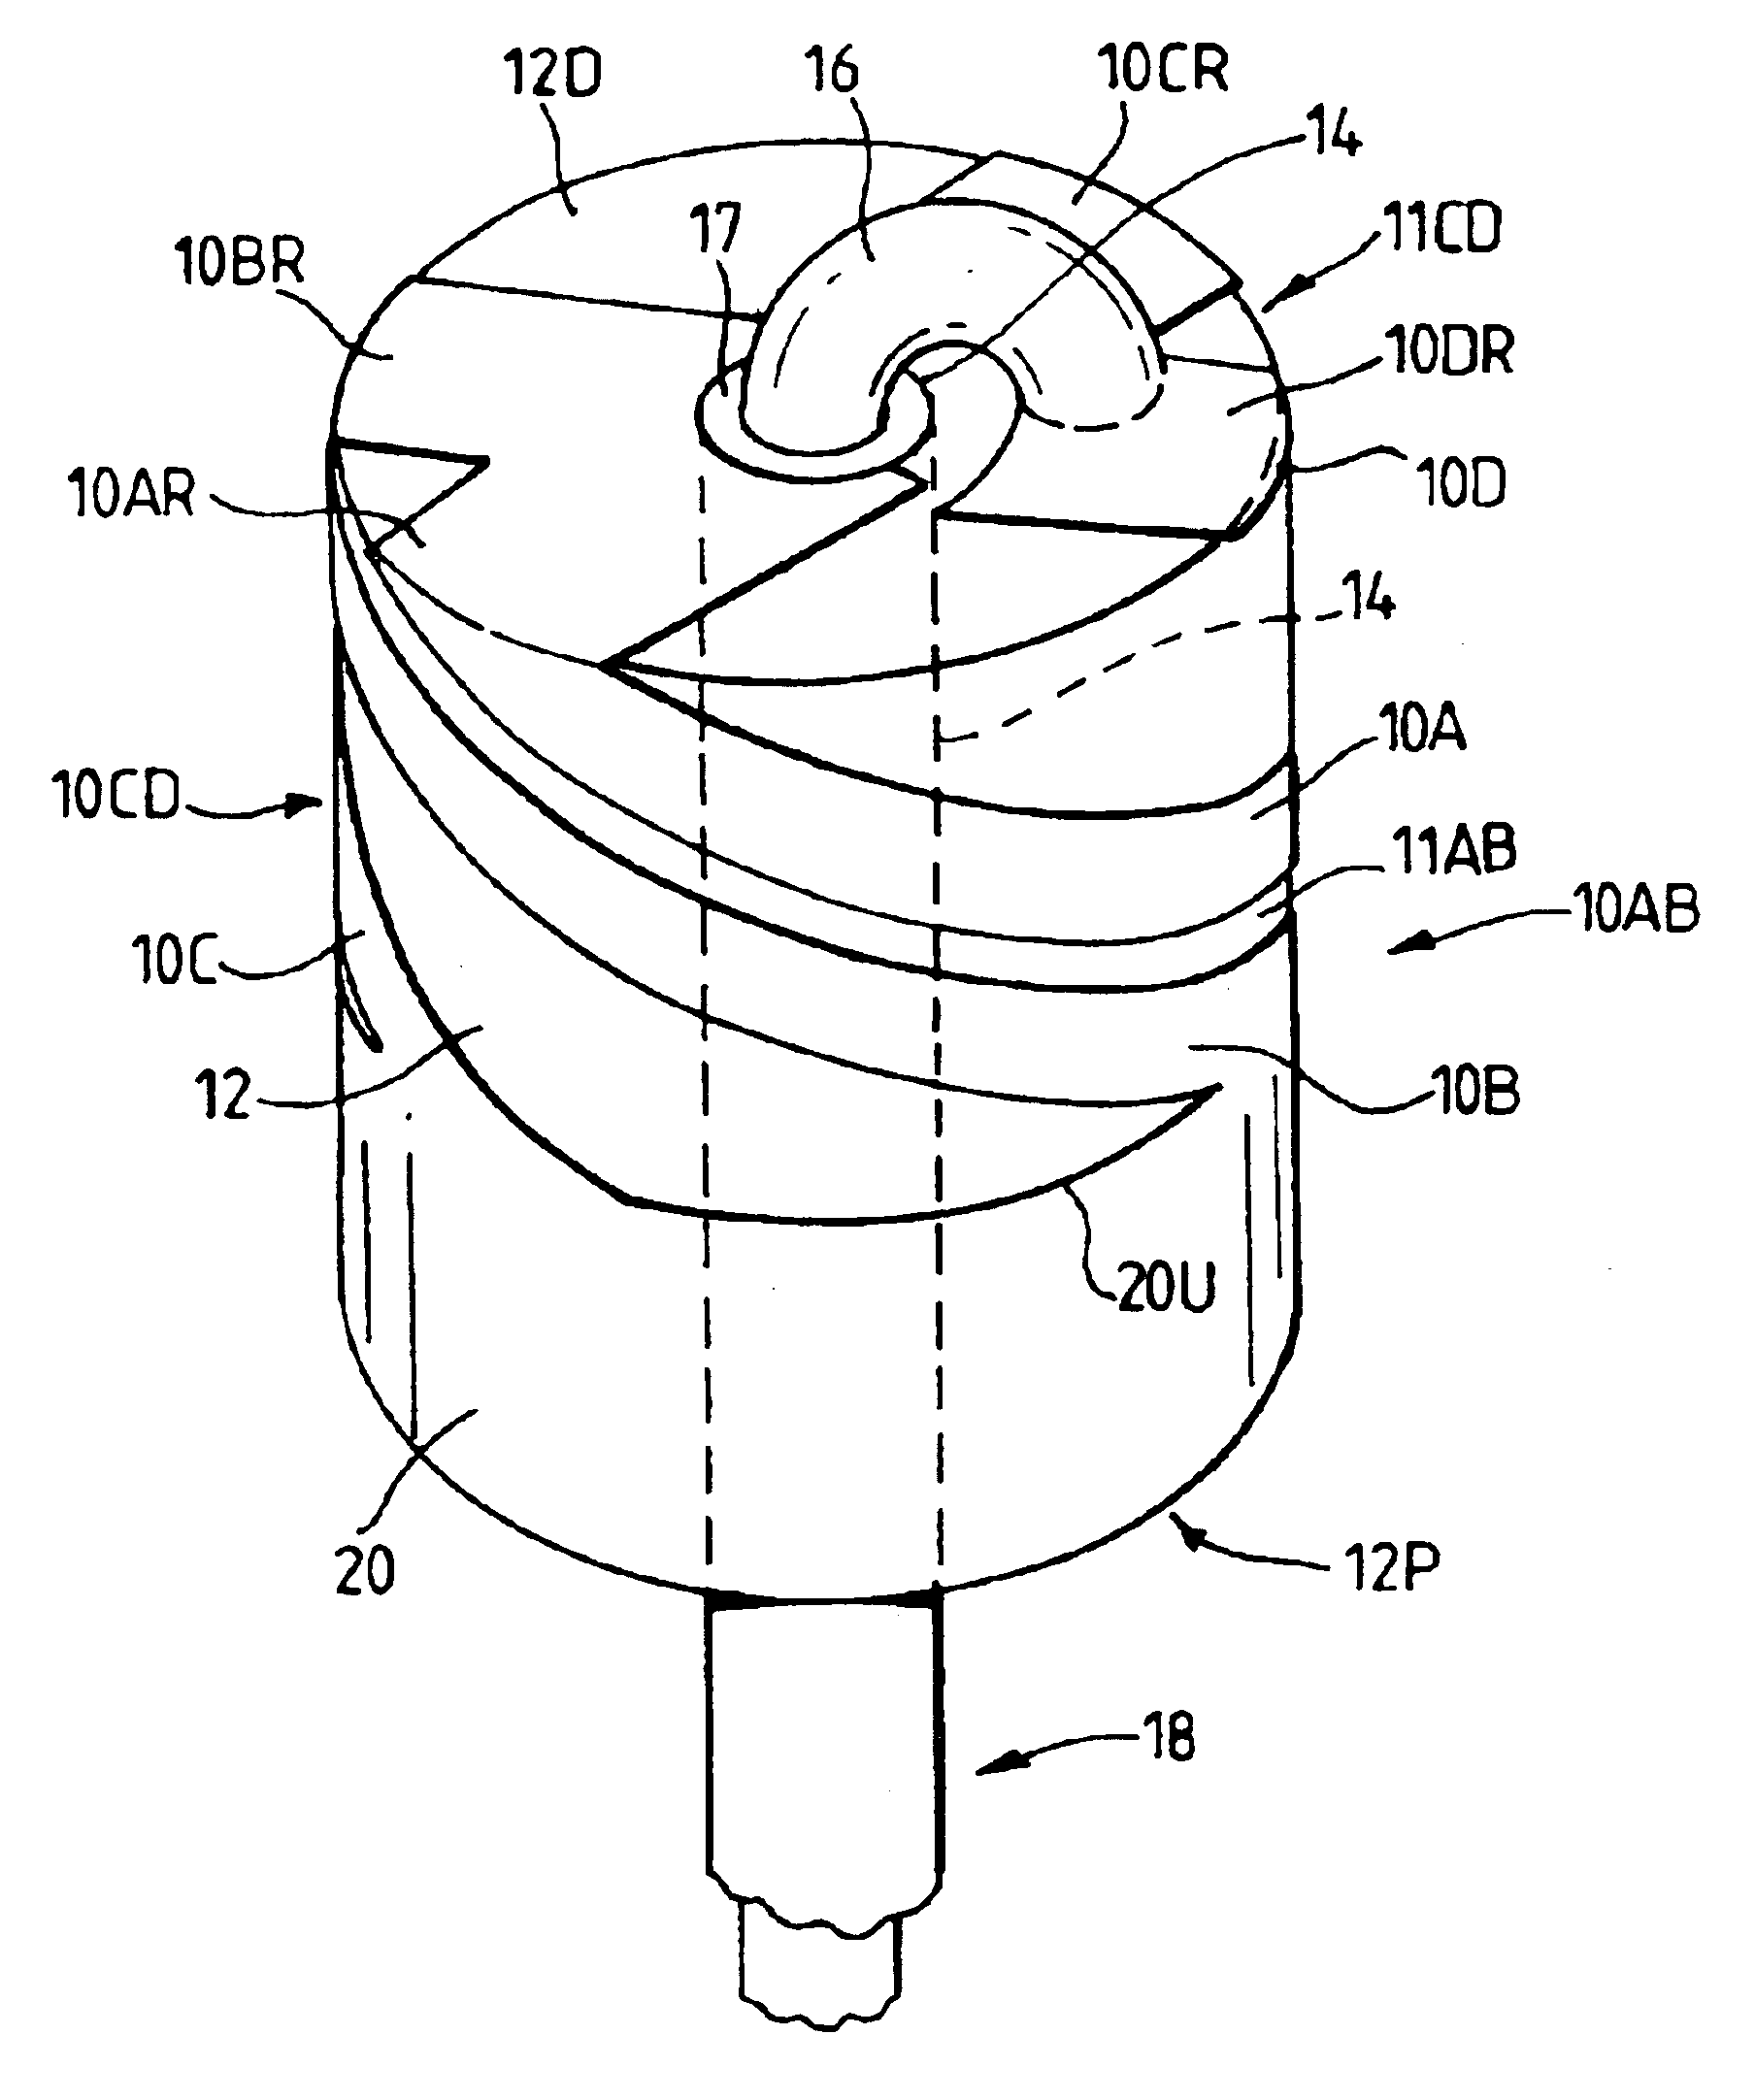 Dielectrically-loaded antenna